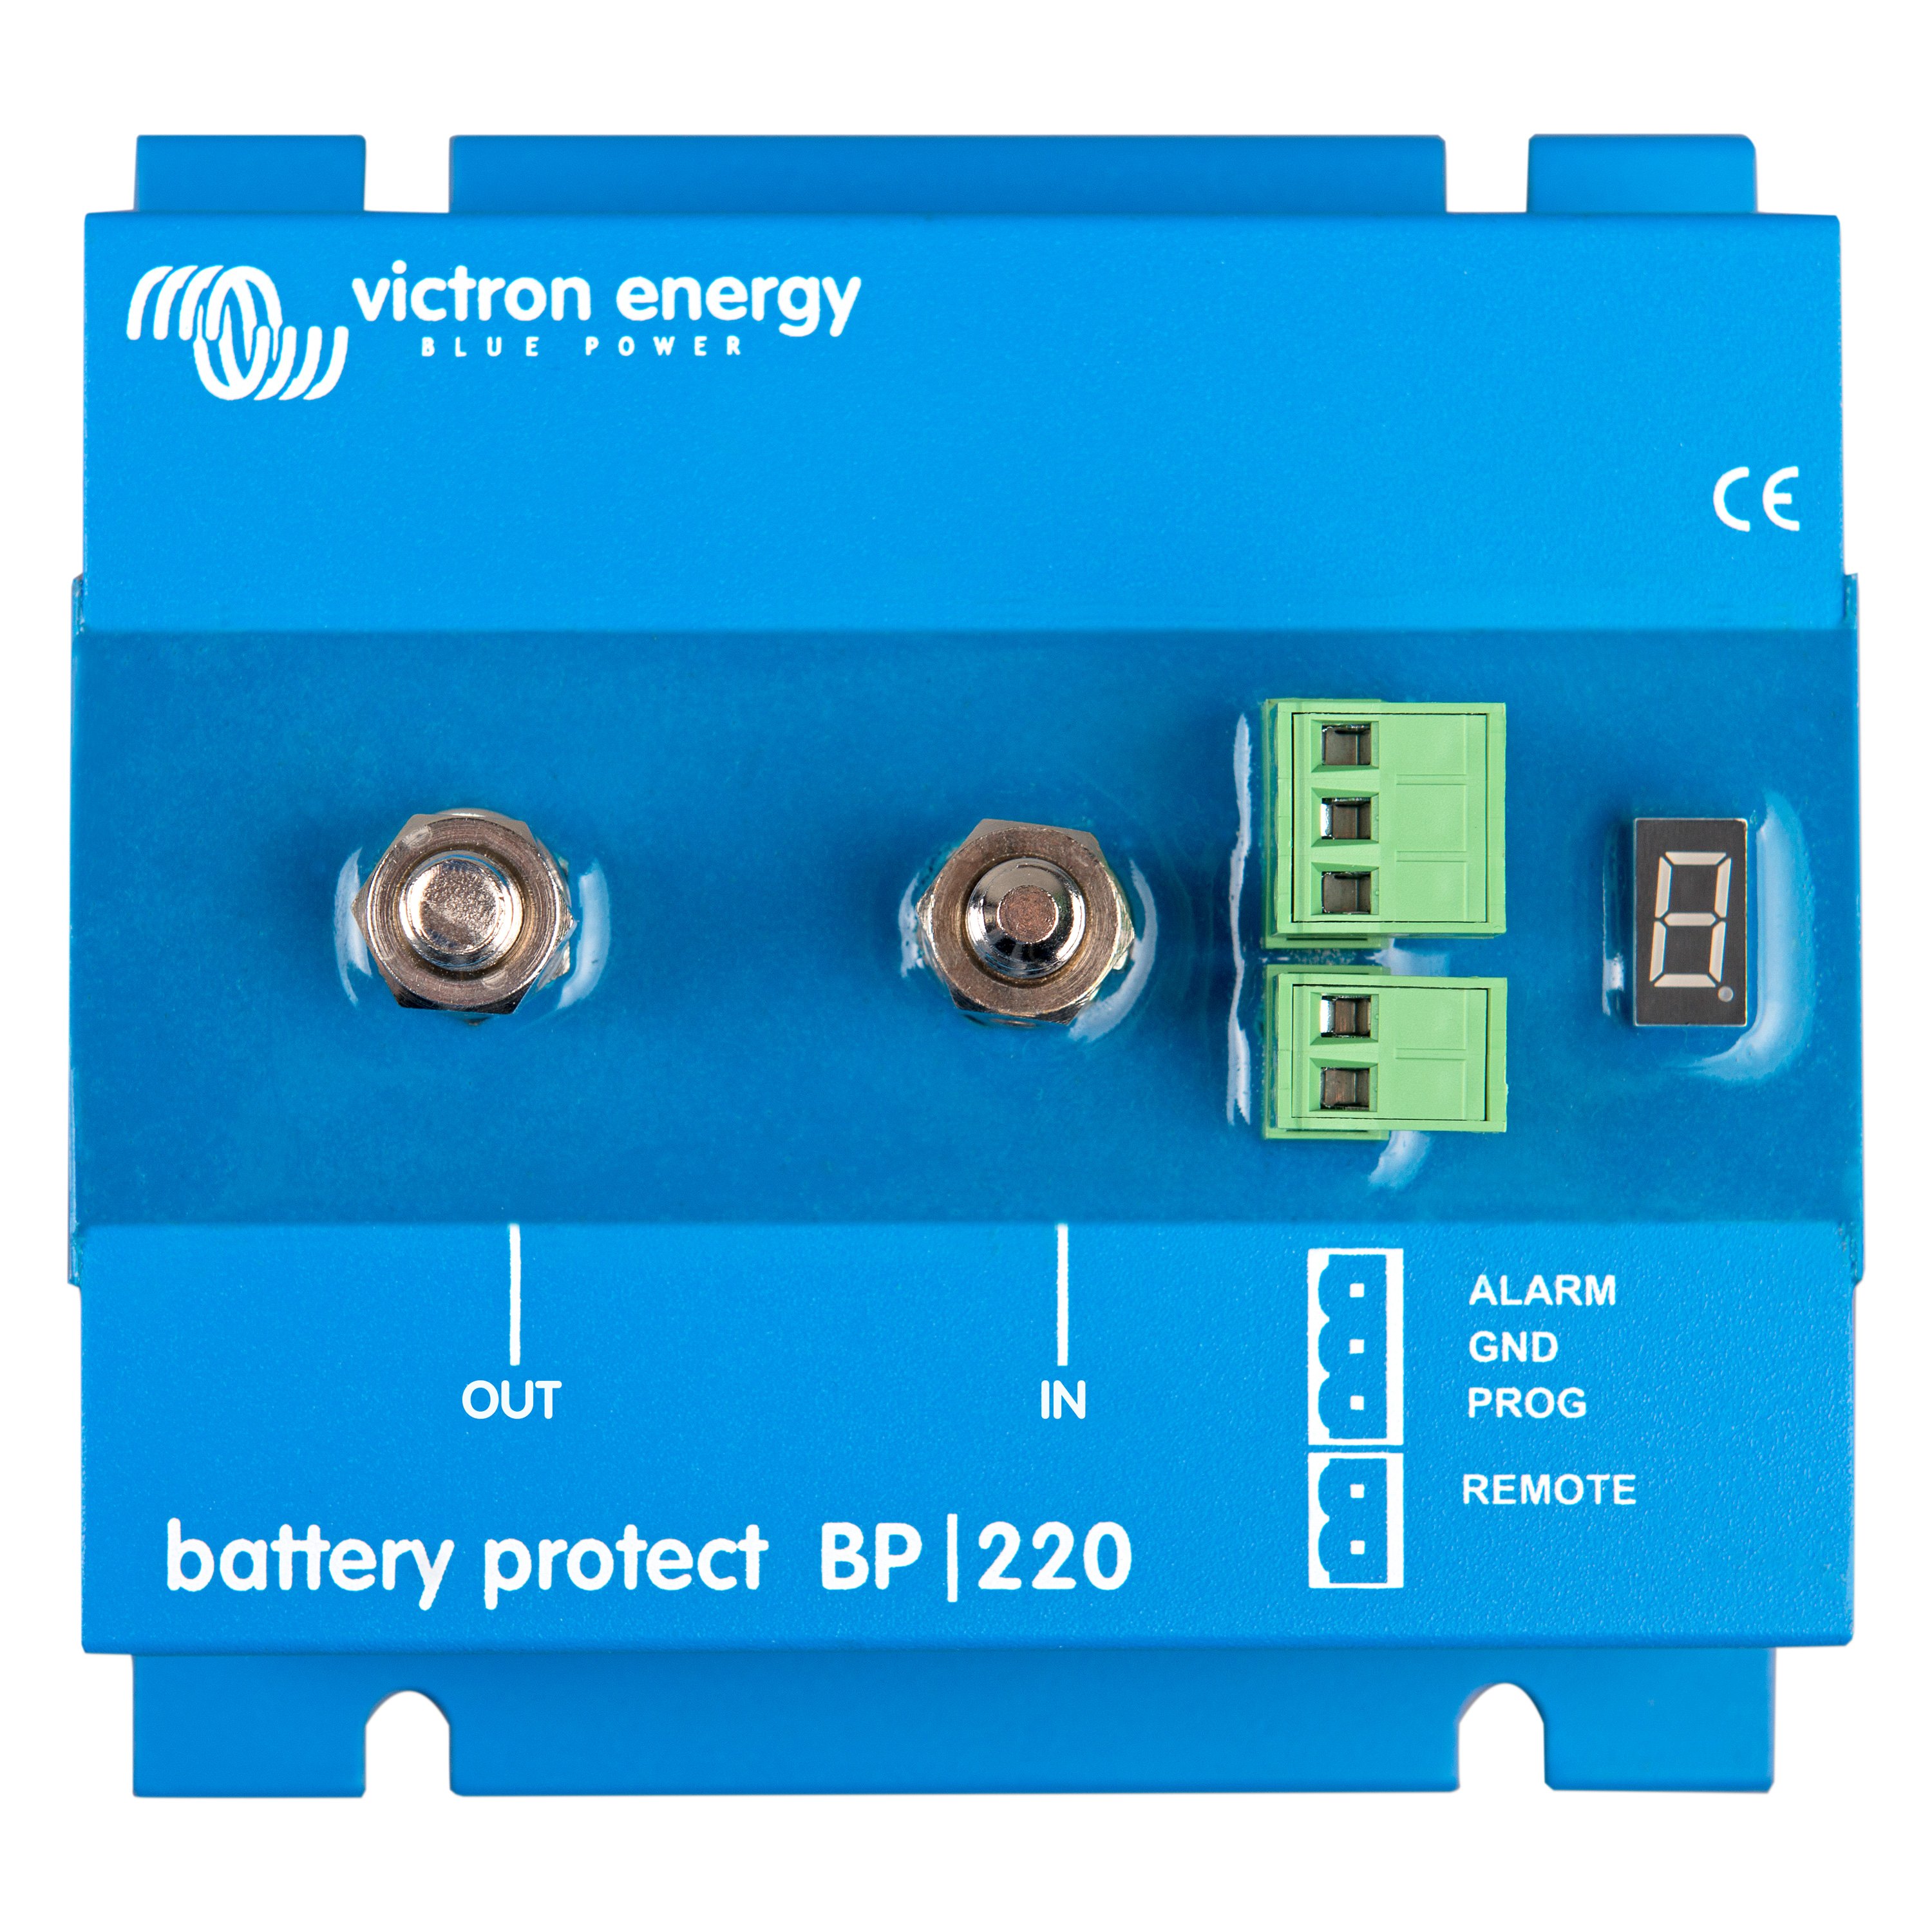 BPR000220400  BATTERY PROTECT 12/24V 220A VICTRON ENERGY